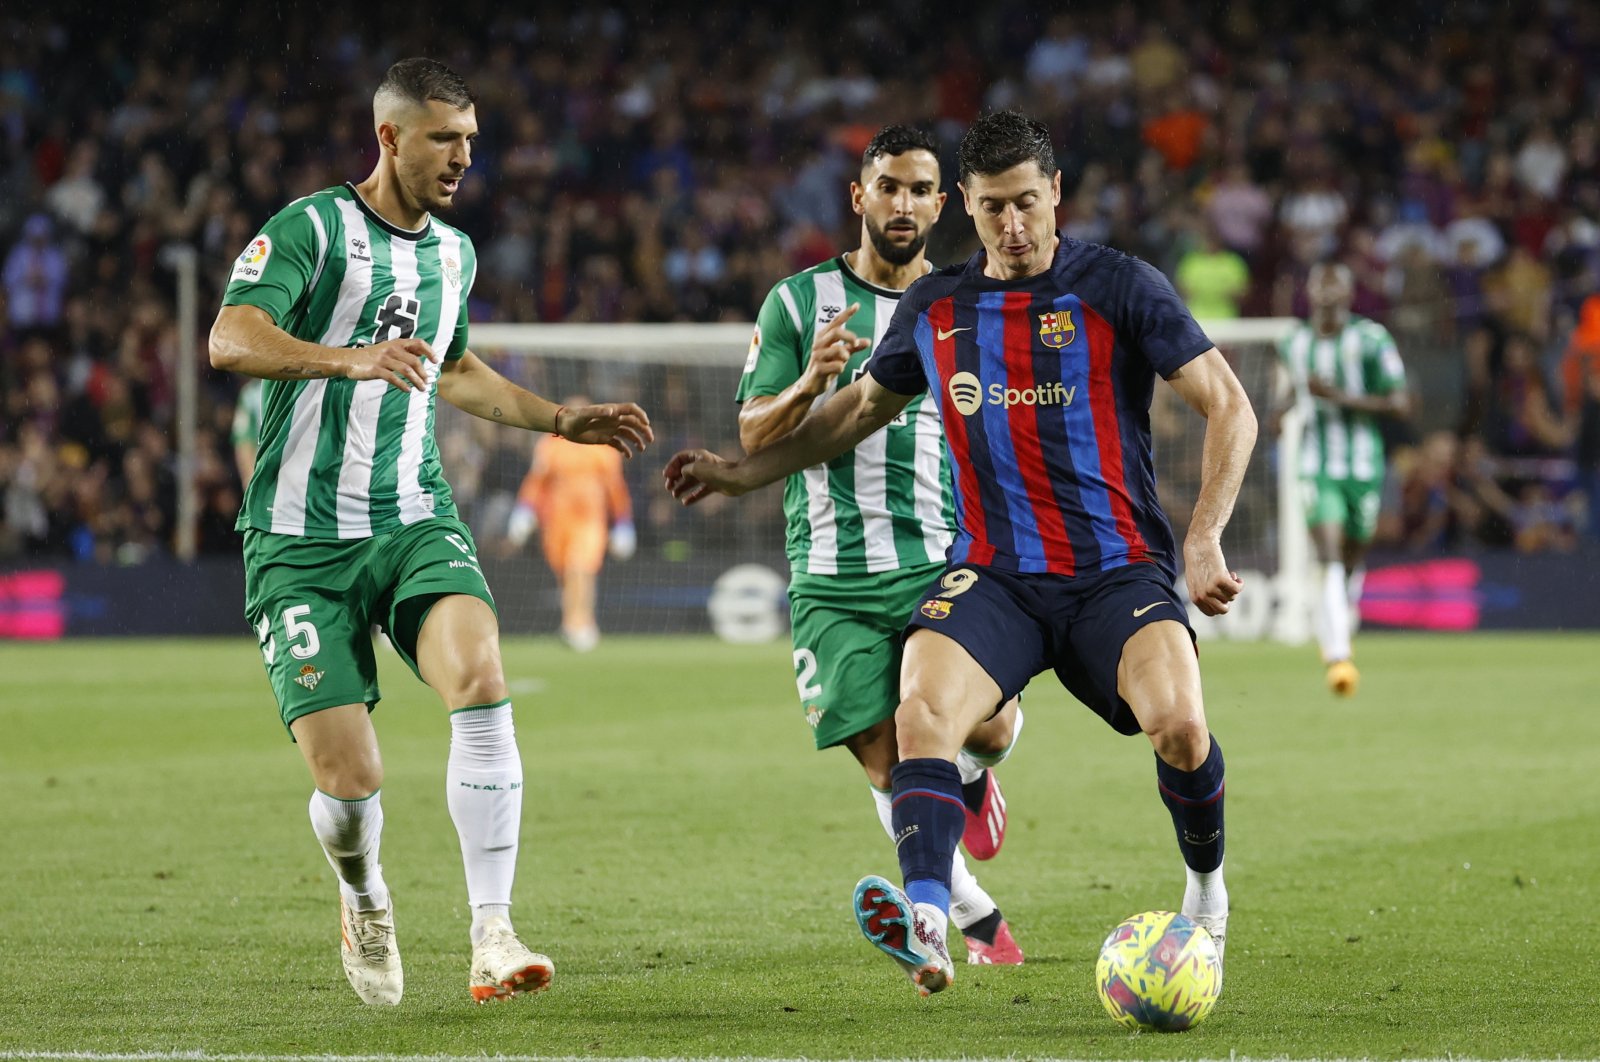 FC Barcelona&#039;s Robert Lewandowski (R) in action against Real Betis&#039; Guido Rodriguez (L) during a Spanish La Liga match between FC Barcelona and Real Betis at Spotify Camp Nou stadium, Barcelona, Spain, April 29, 2023. (EPA Photo)